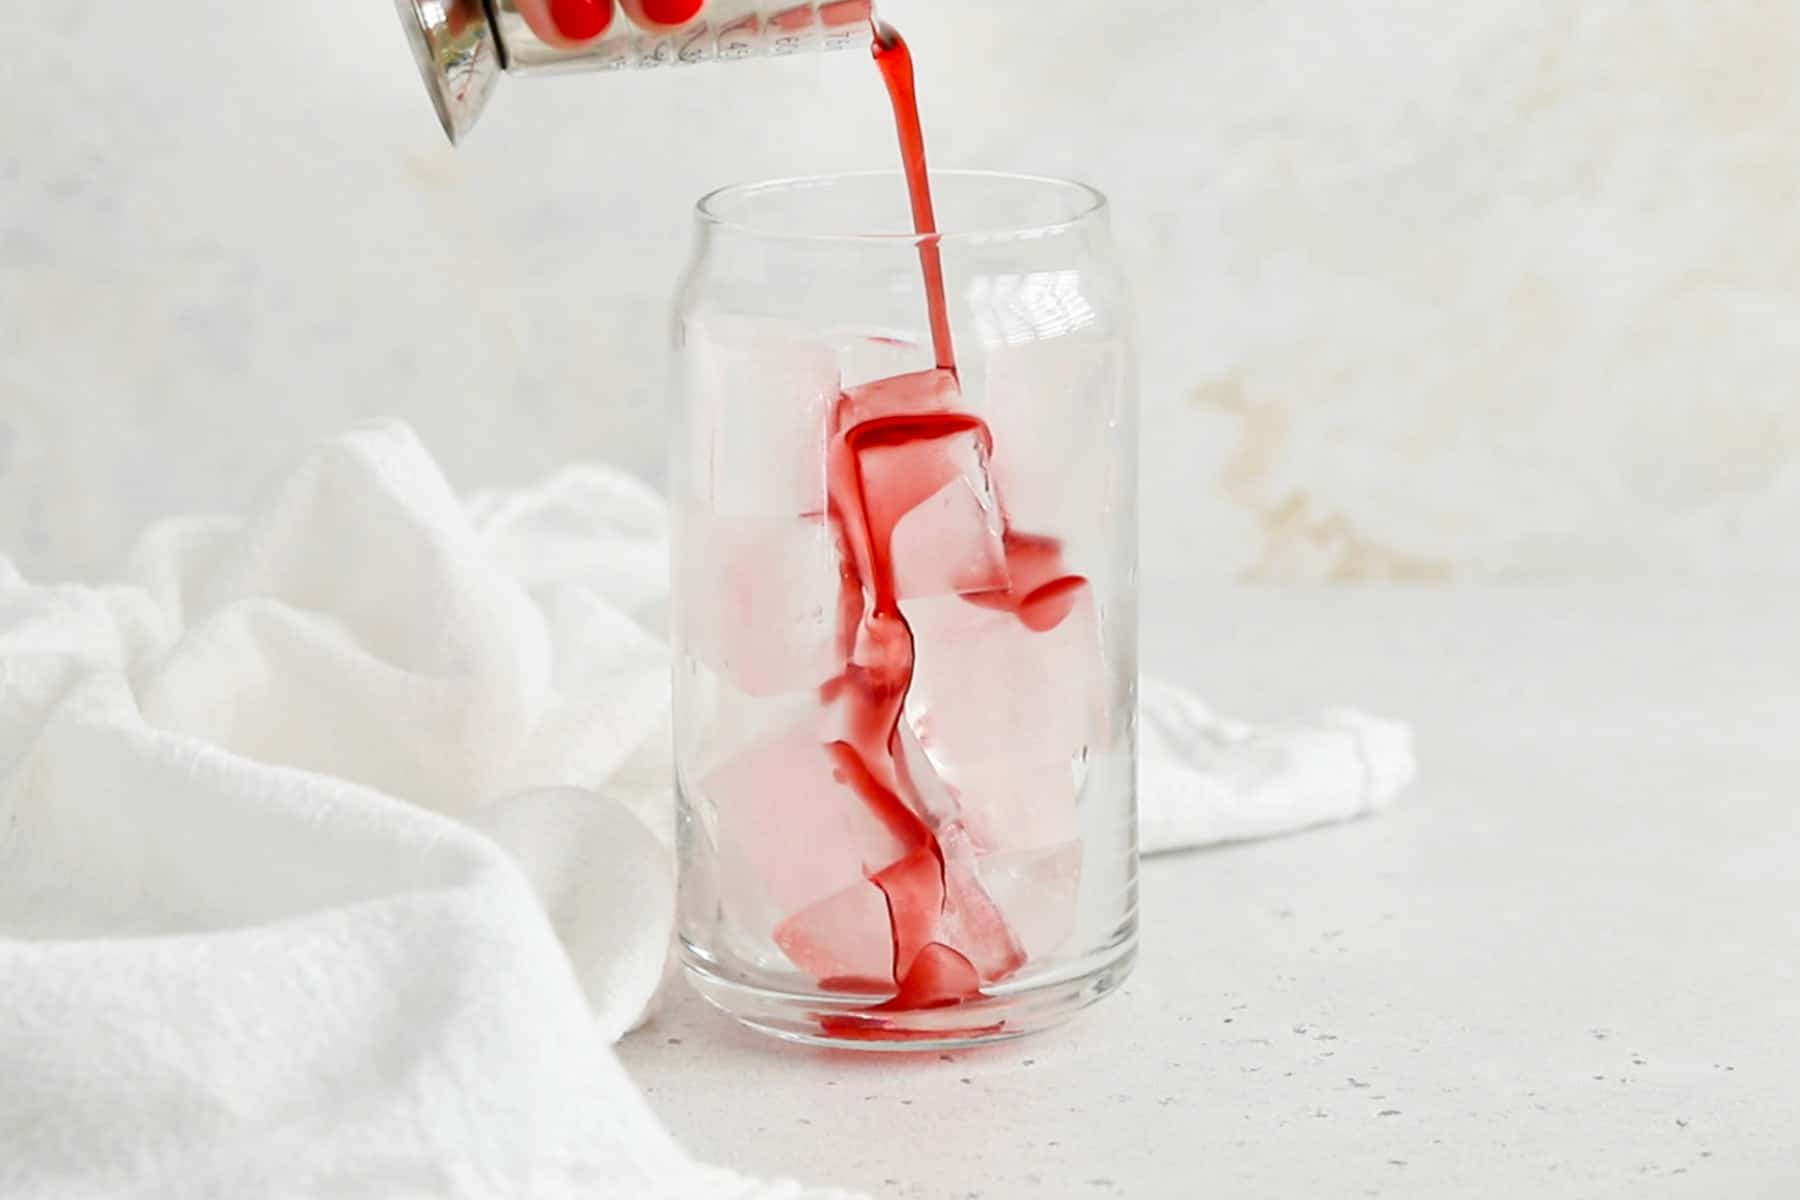 Pouring grenadine into a glass to make a classic shirley temple drink